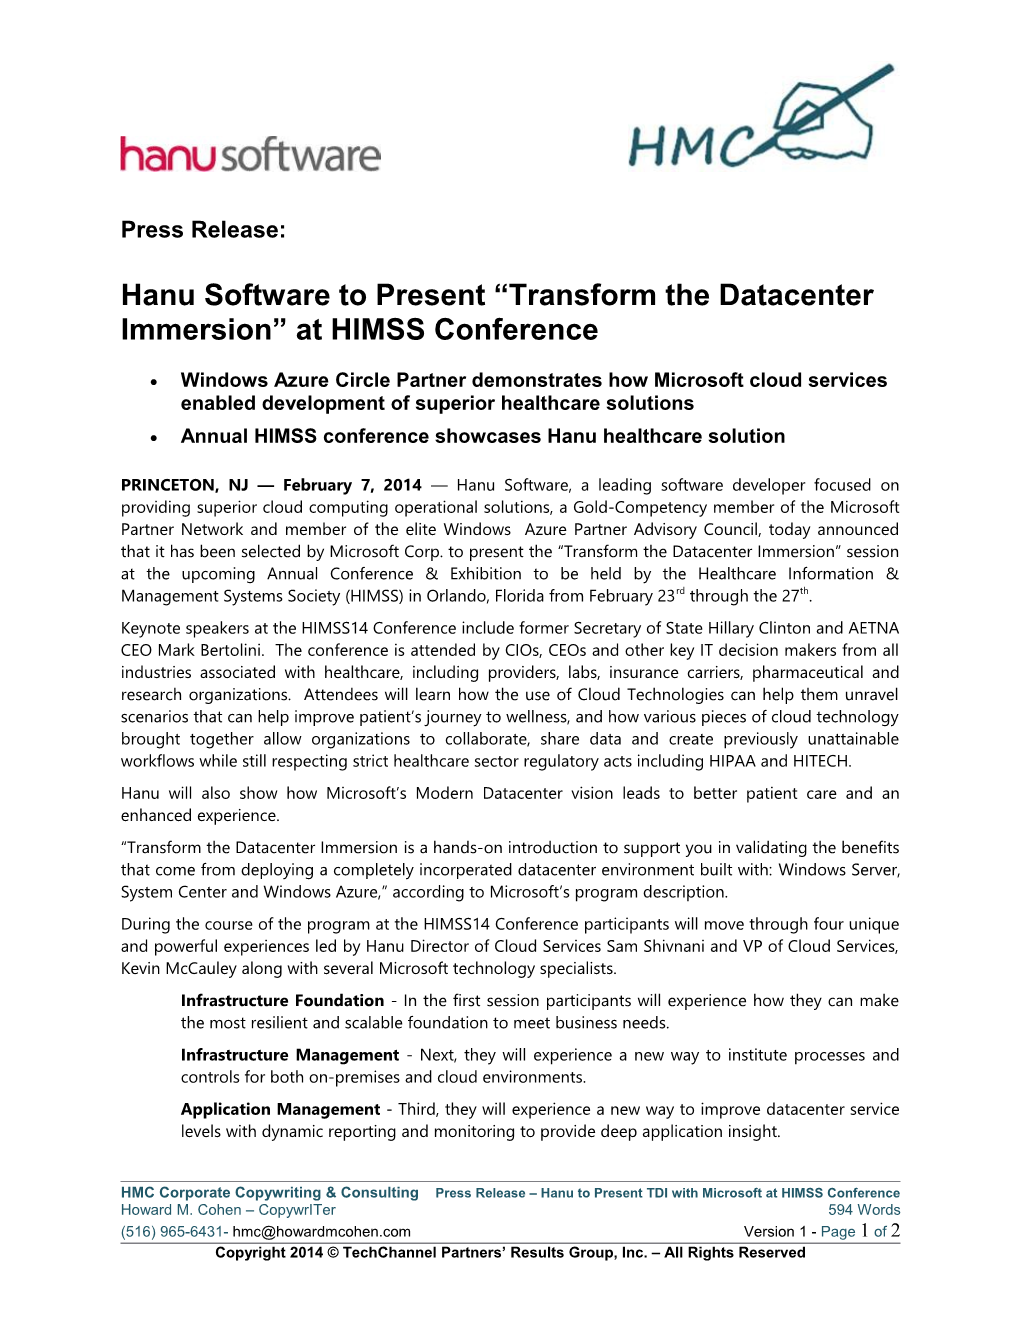 Hanu Software to Present Transform the Datacenter Immersion at HIMSS Conference